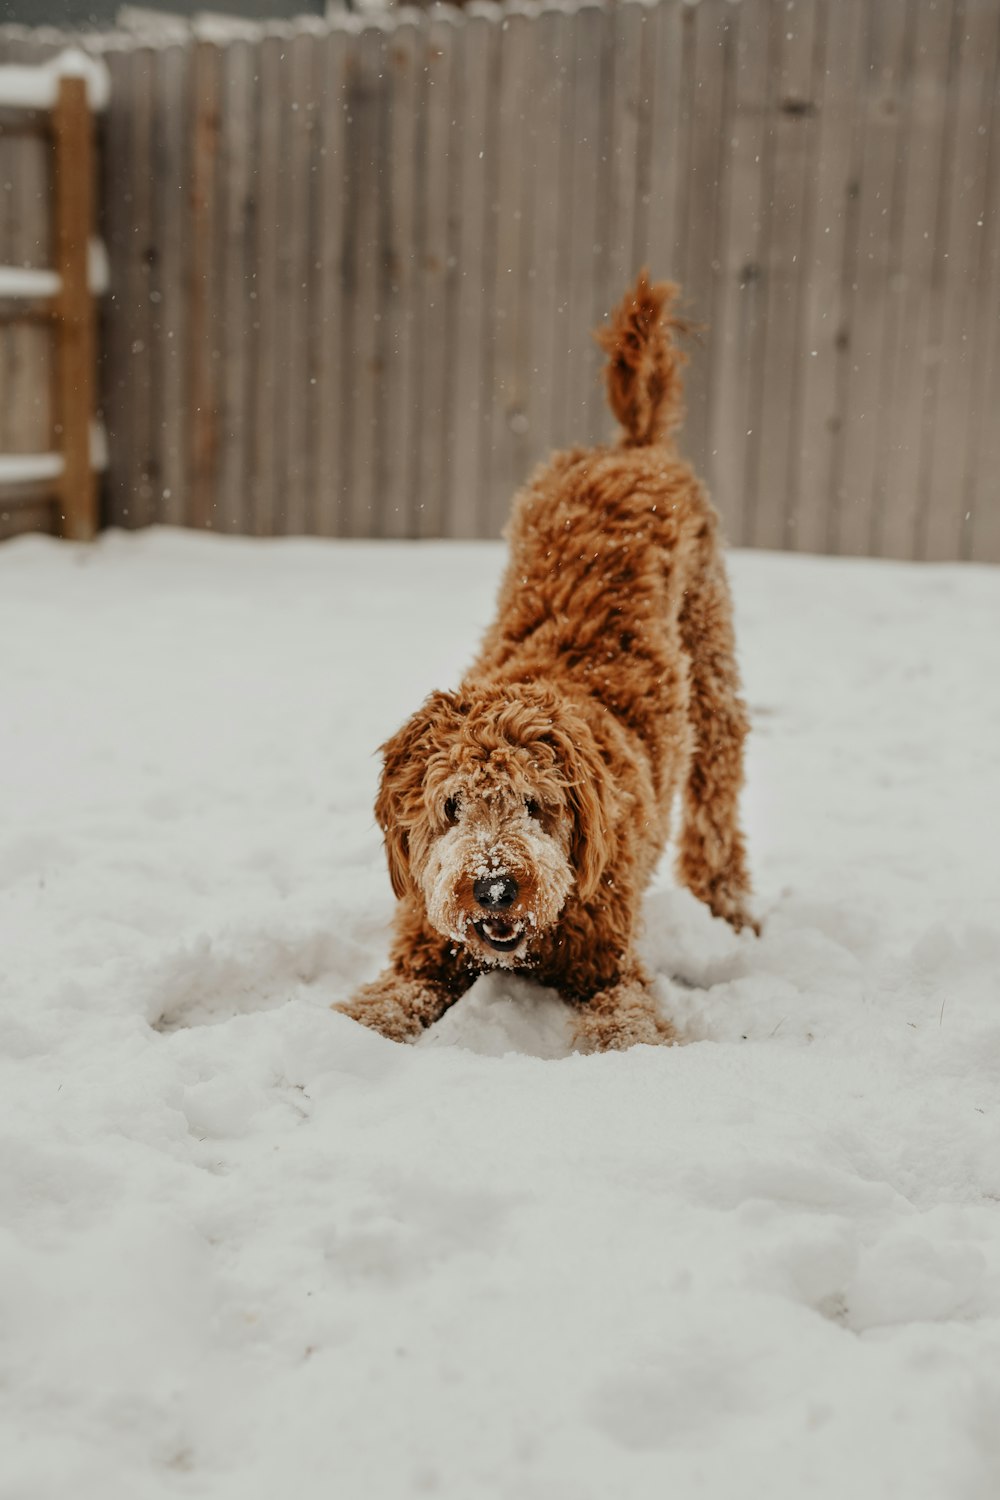 dog playing on snow near fence